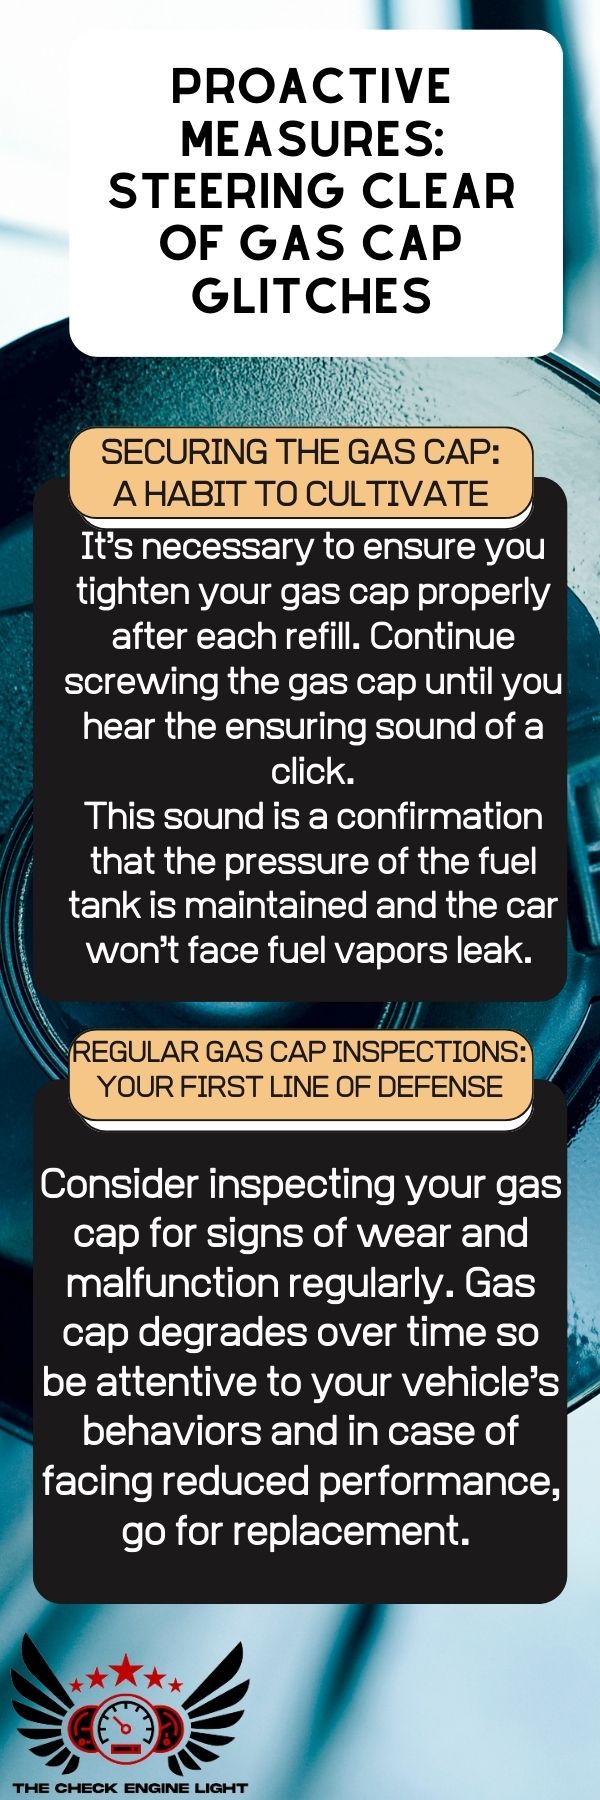 an infographic for Proactive Measures: Steering Clear of Gas Cap Glitches